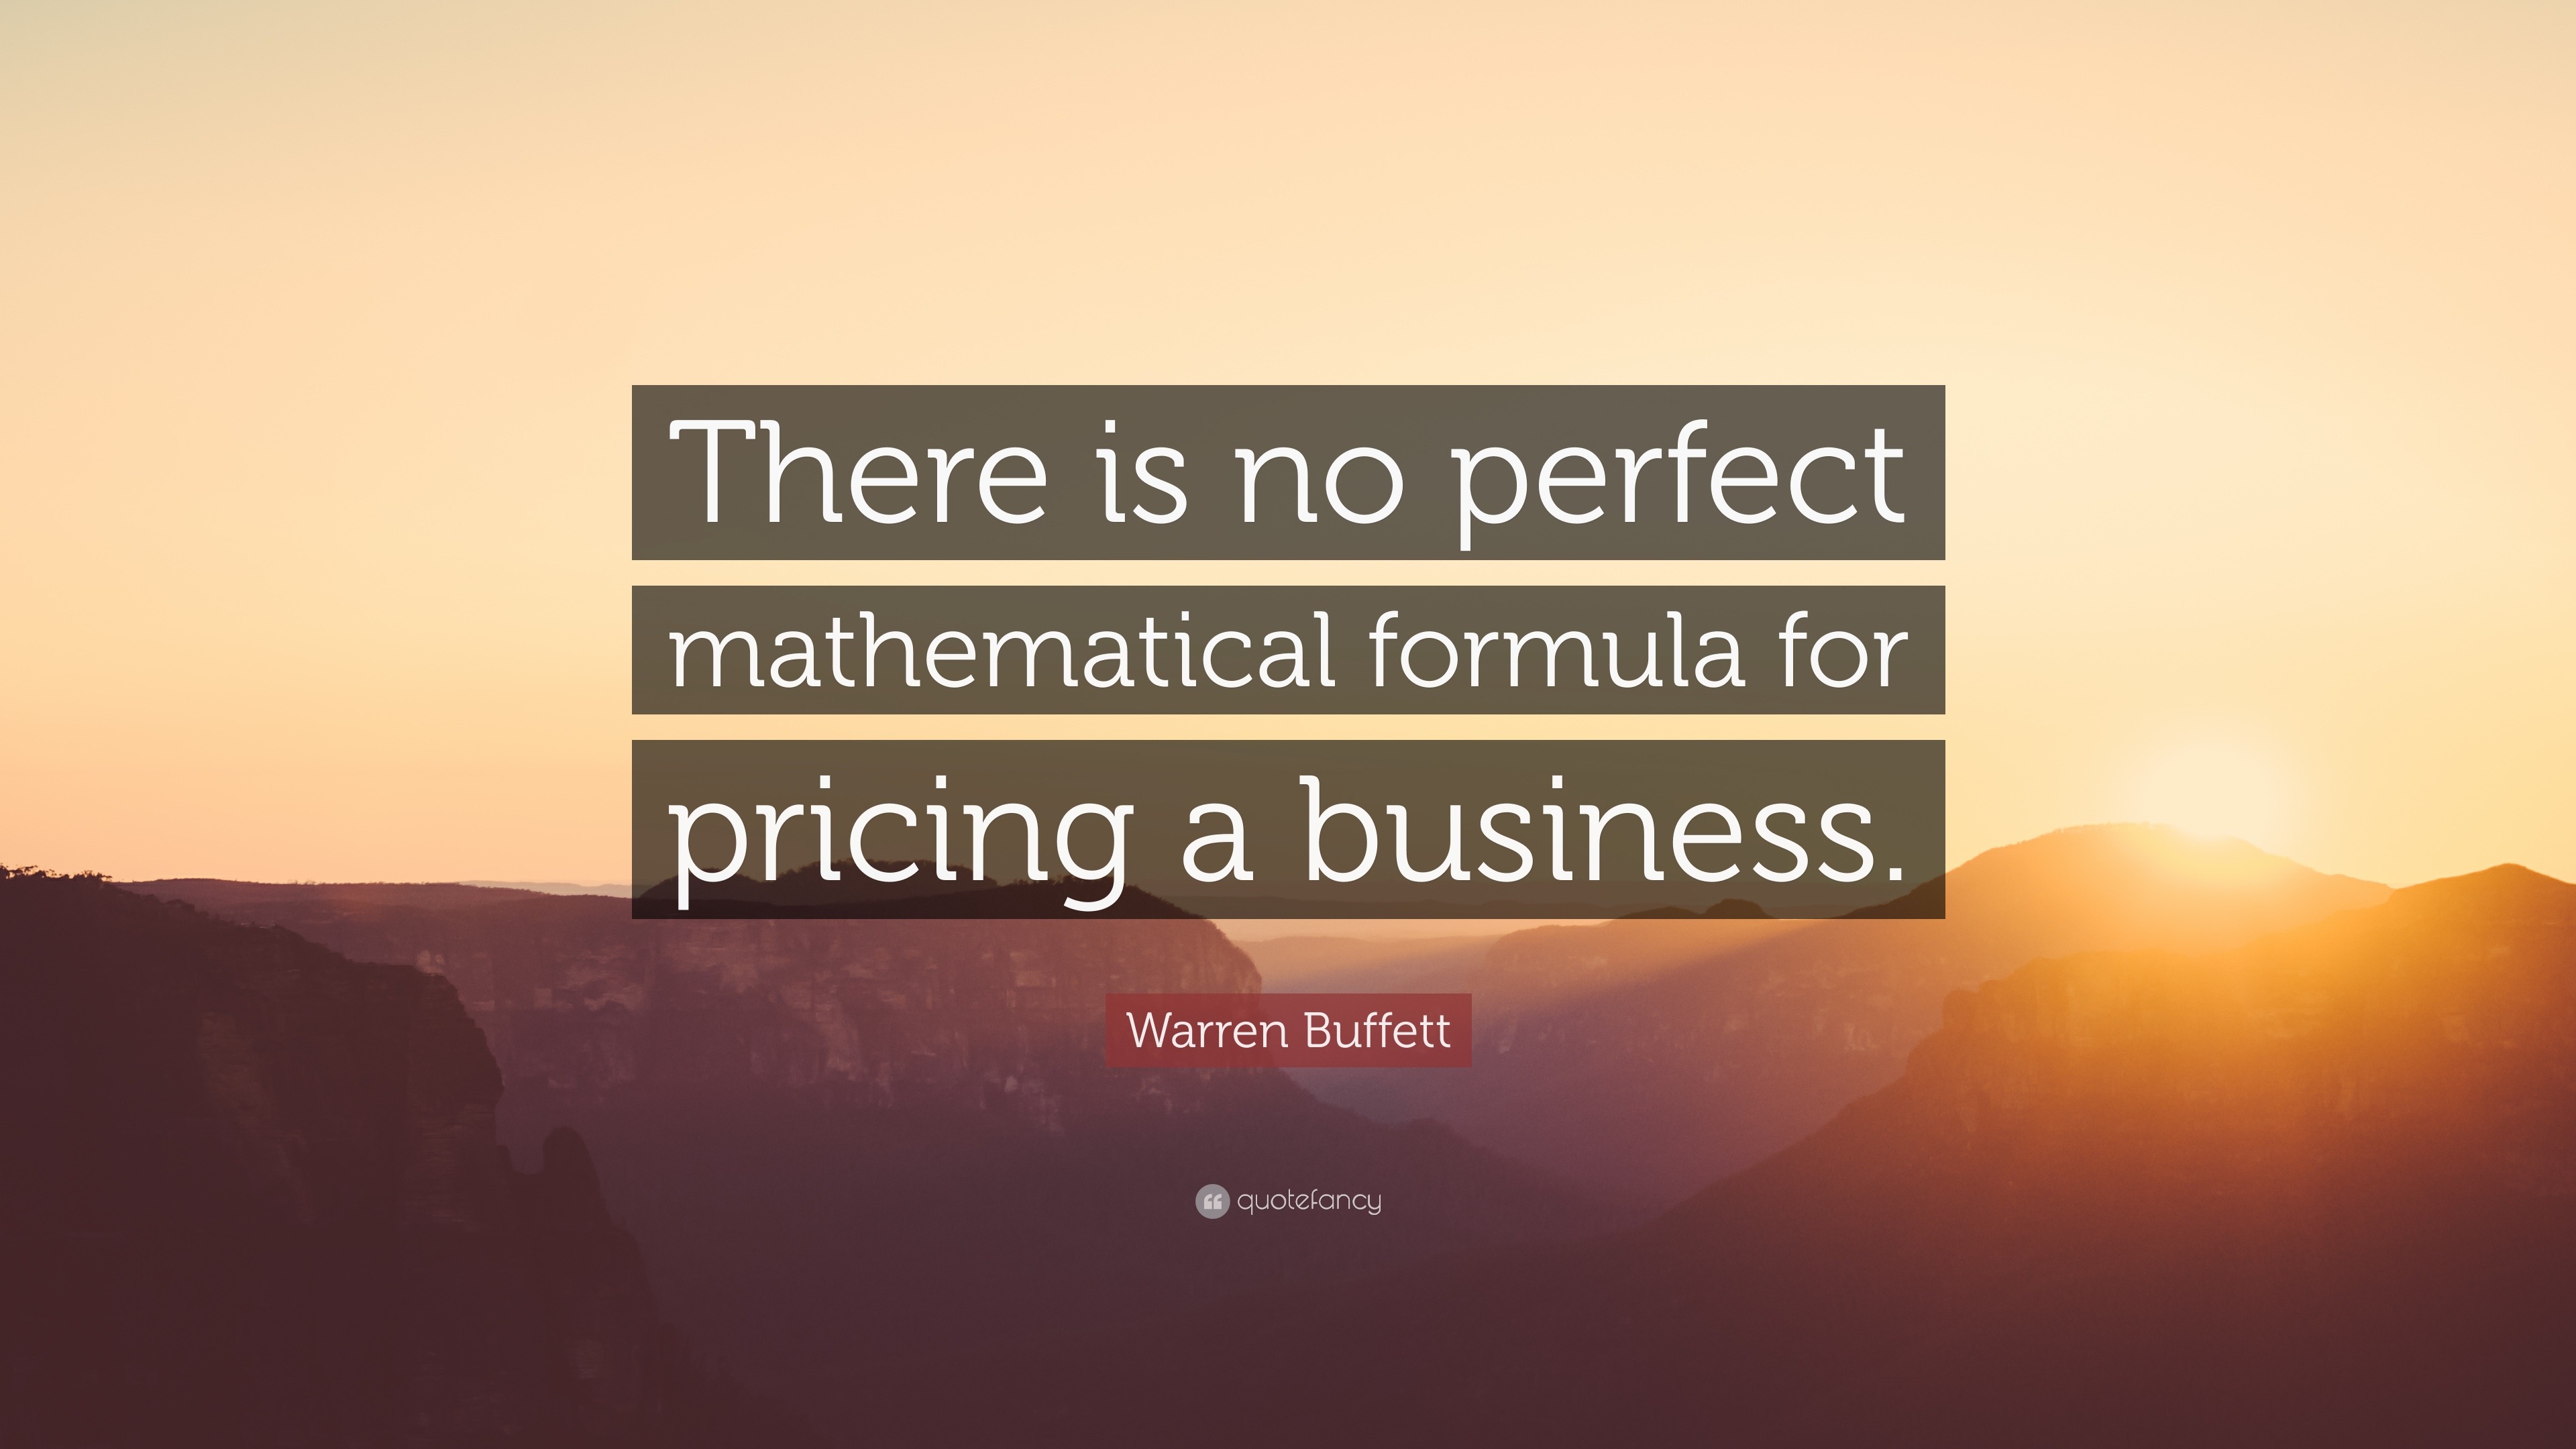 Warren Buffett Quote There Is No Perfect Mathematical Formula Images, Photos, Reviews